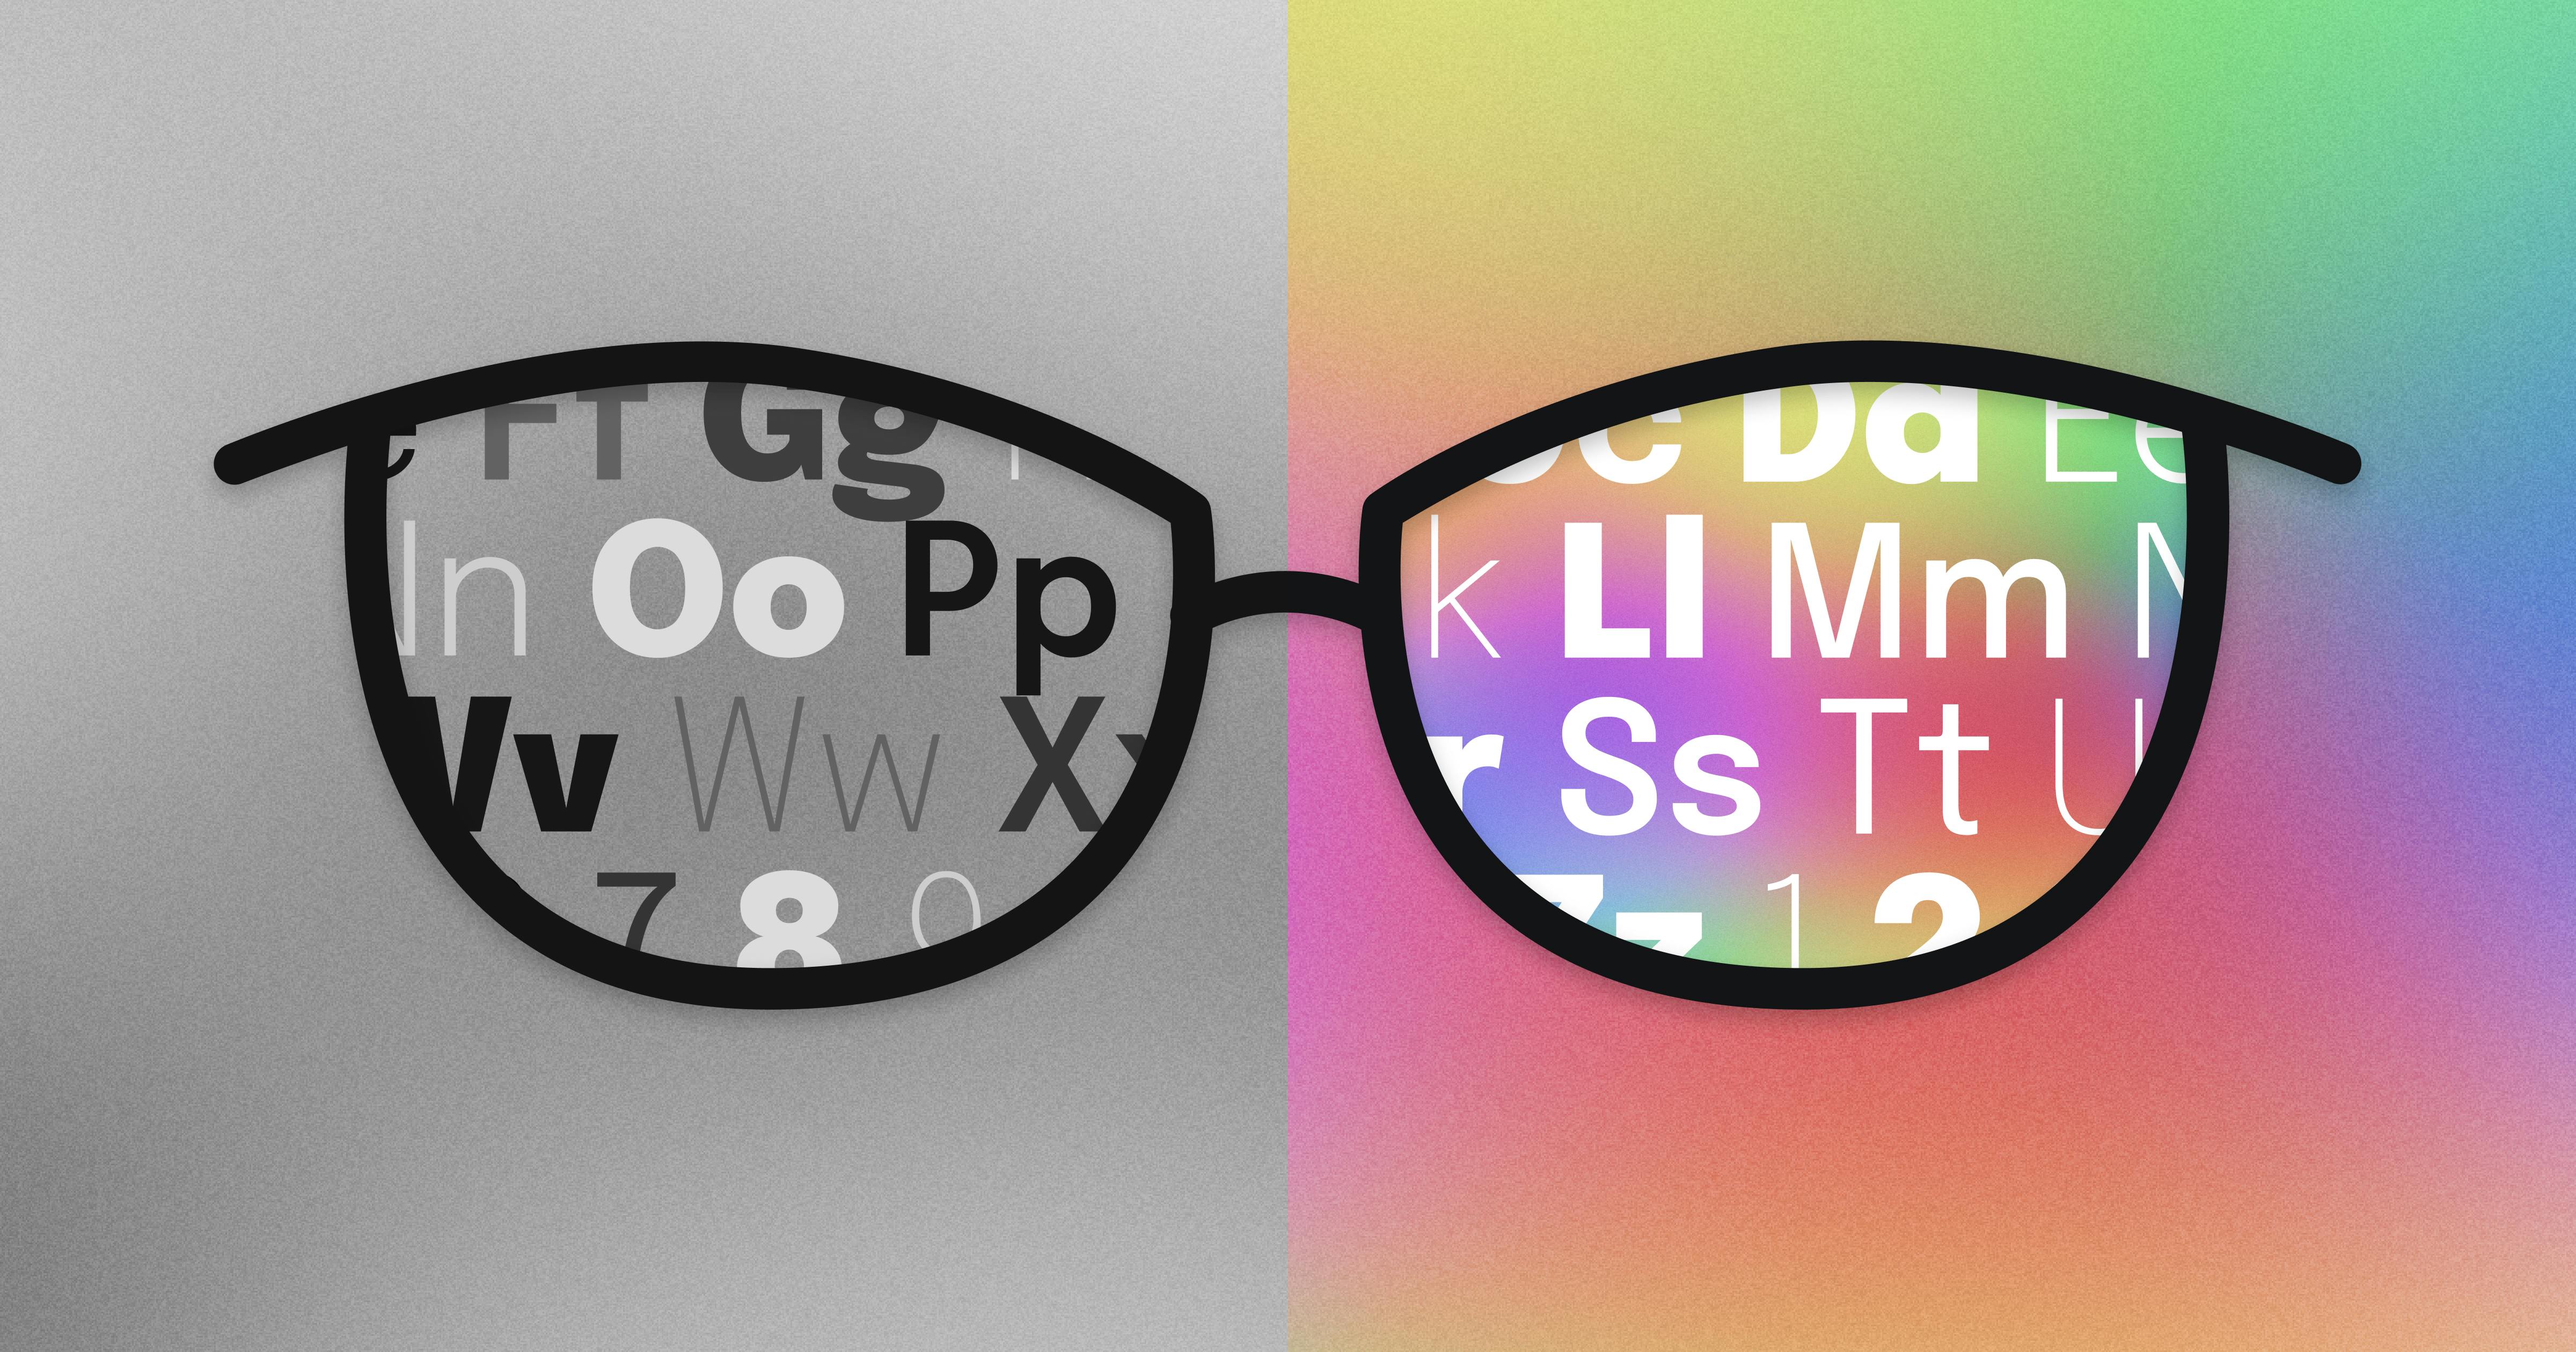 A pair of eyeglasses with random letters in the lenses. The left side of the image is black and white, while the right side of the image is a rainbow of colors.